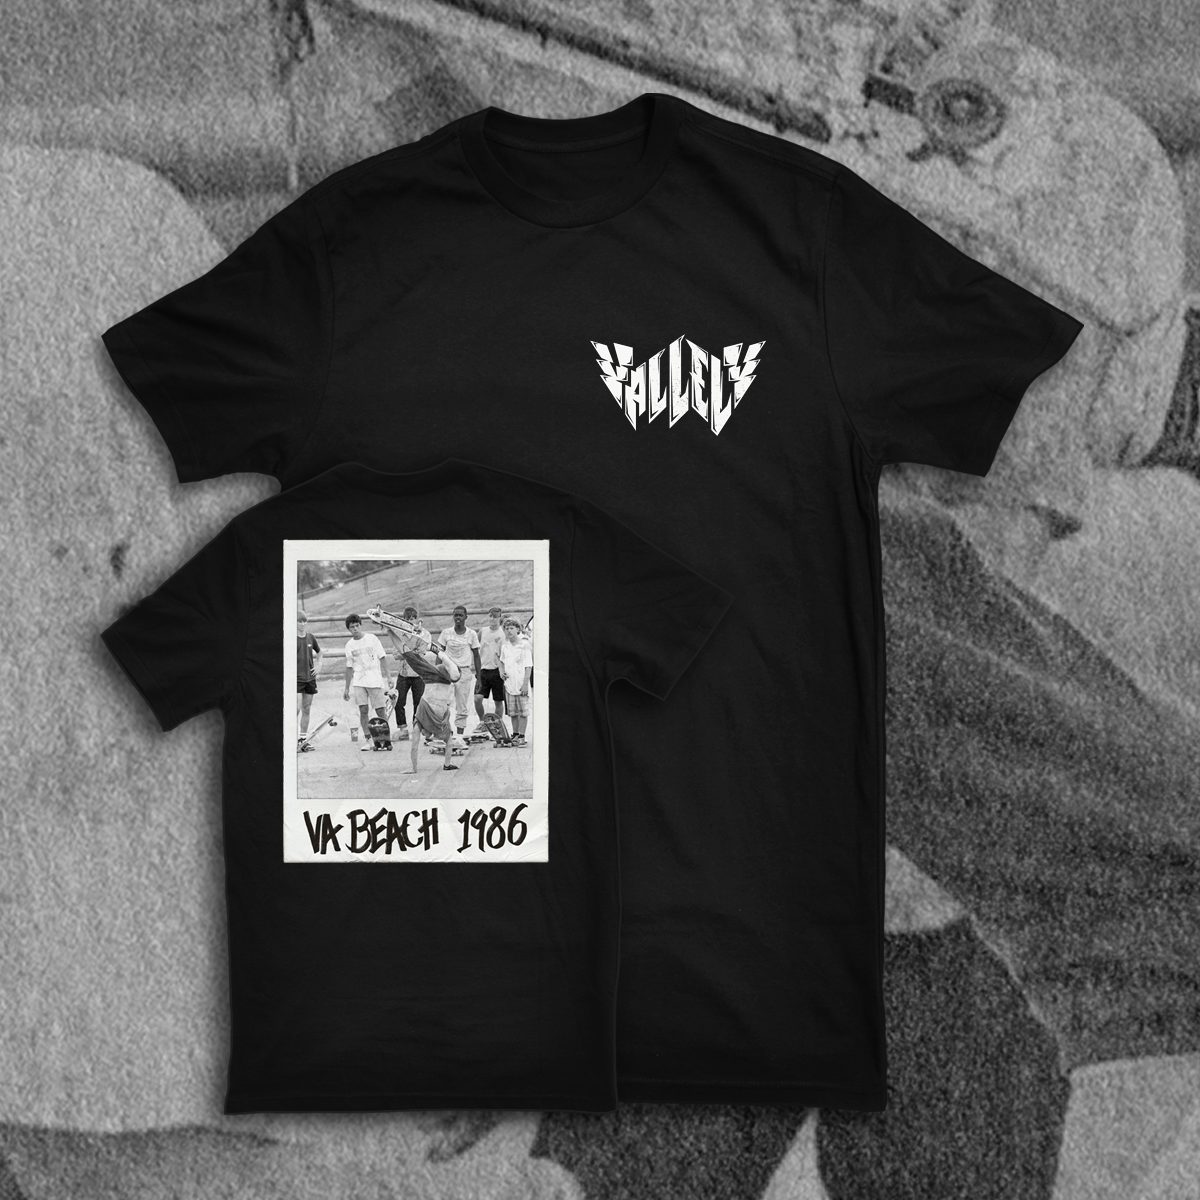 MIKE VALLELY "1986" SHIRT